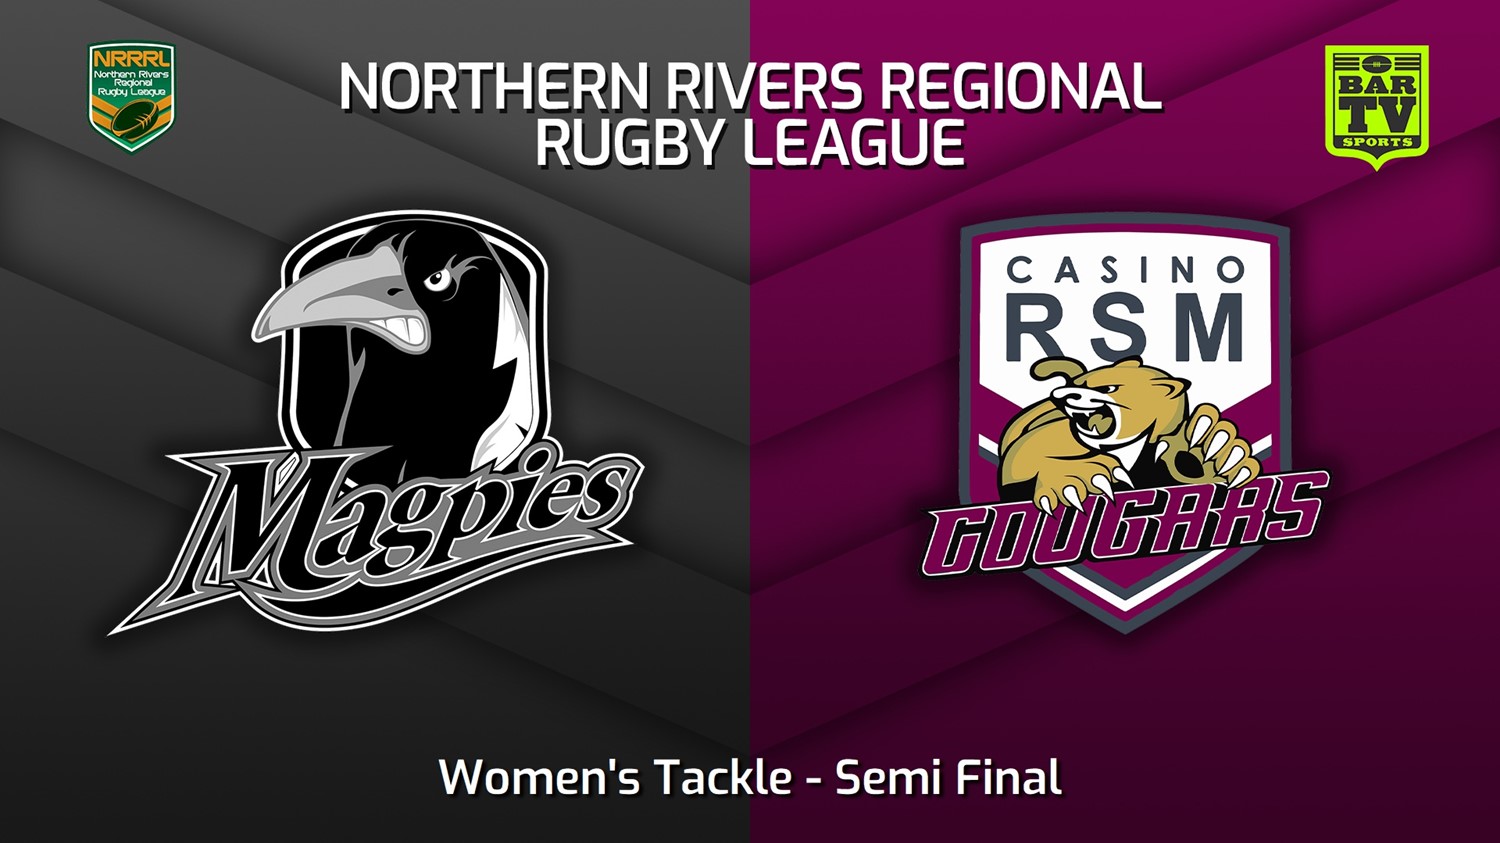 230805-Northern Rivers Semi Final - Women's Tackle - Lower Clarence Magpies v Casino RSM Cougars Slate Image